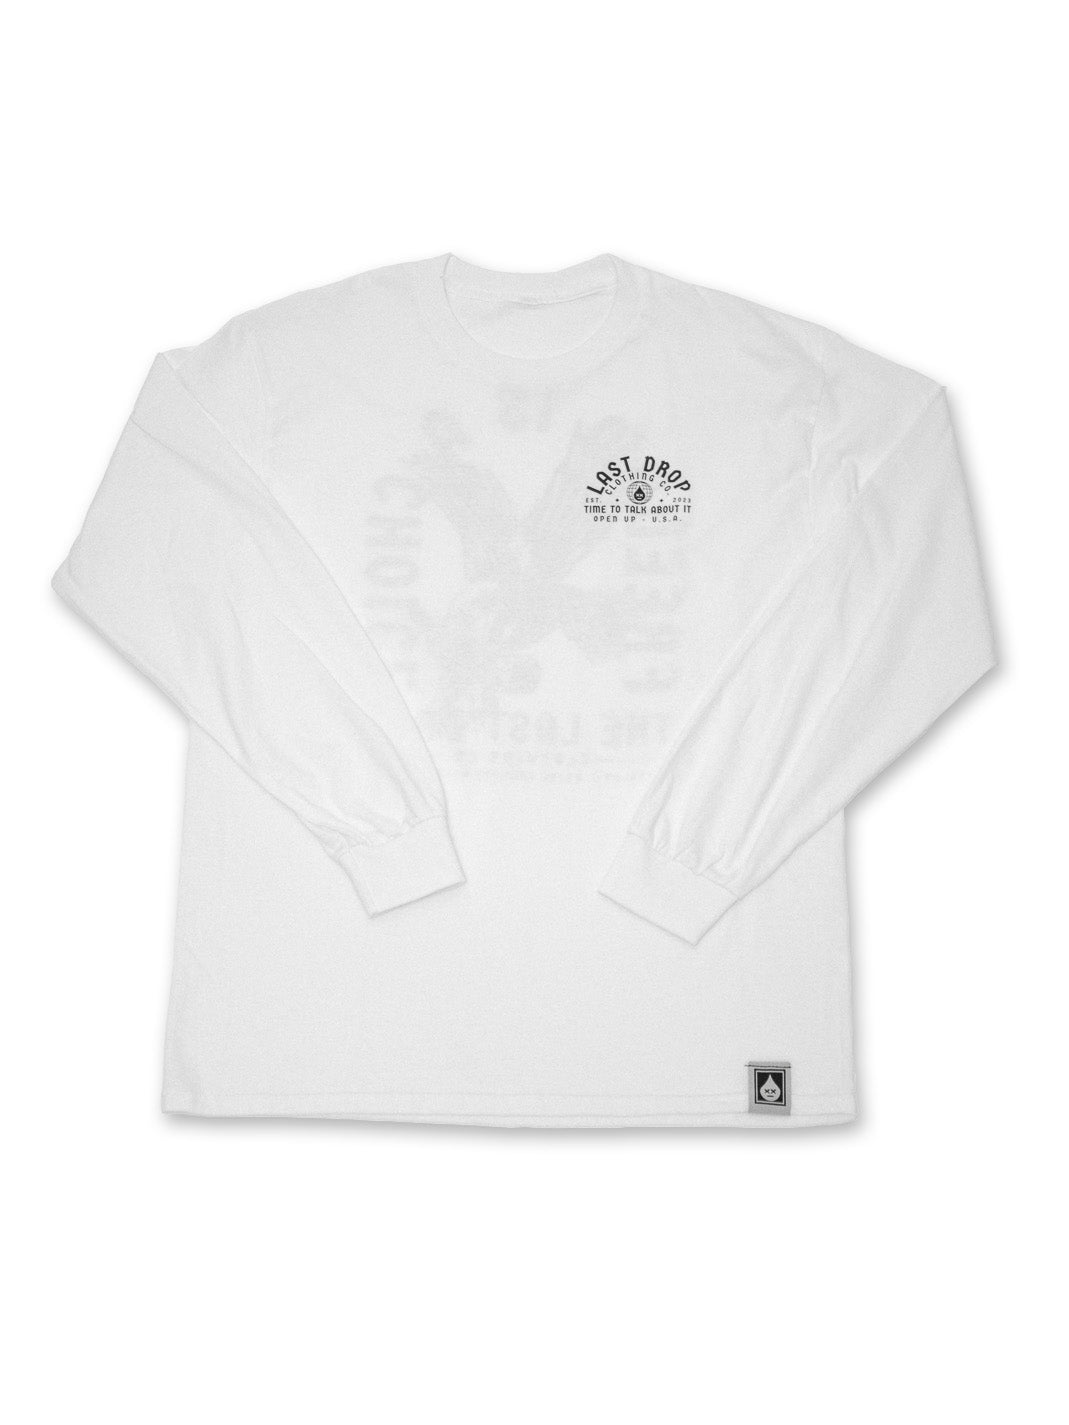 A white long-sleeve t-shirt with an image of a freedom eagle.